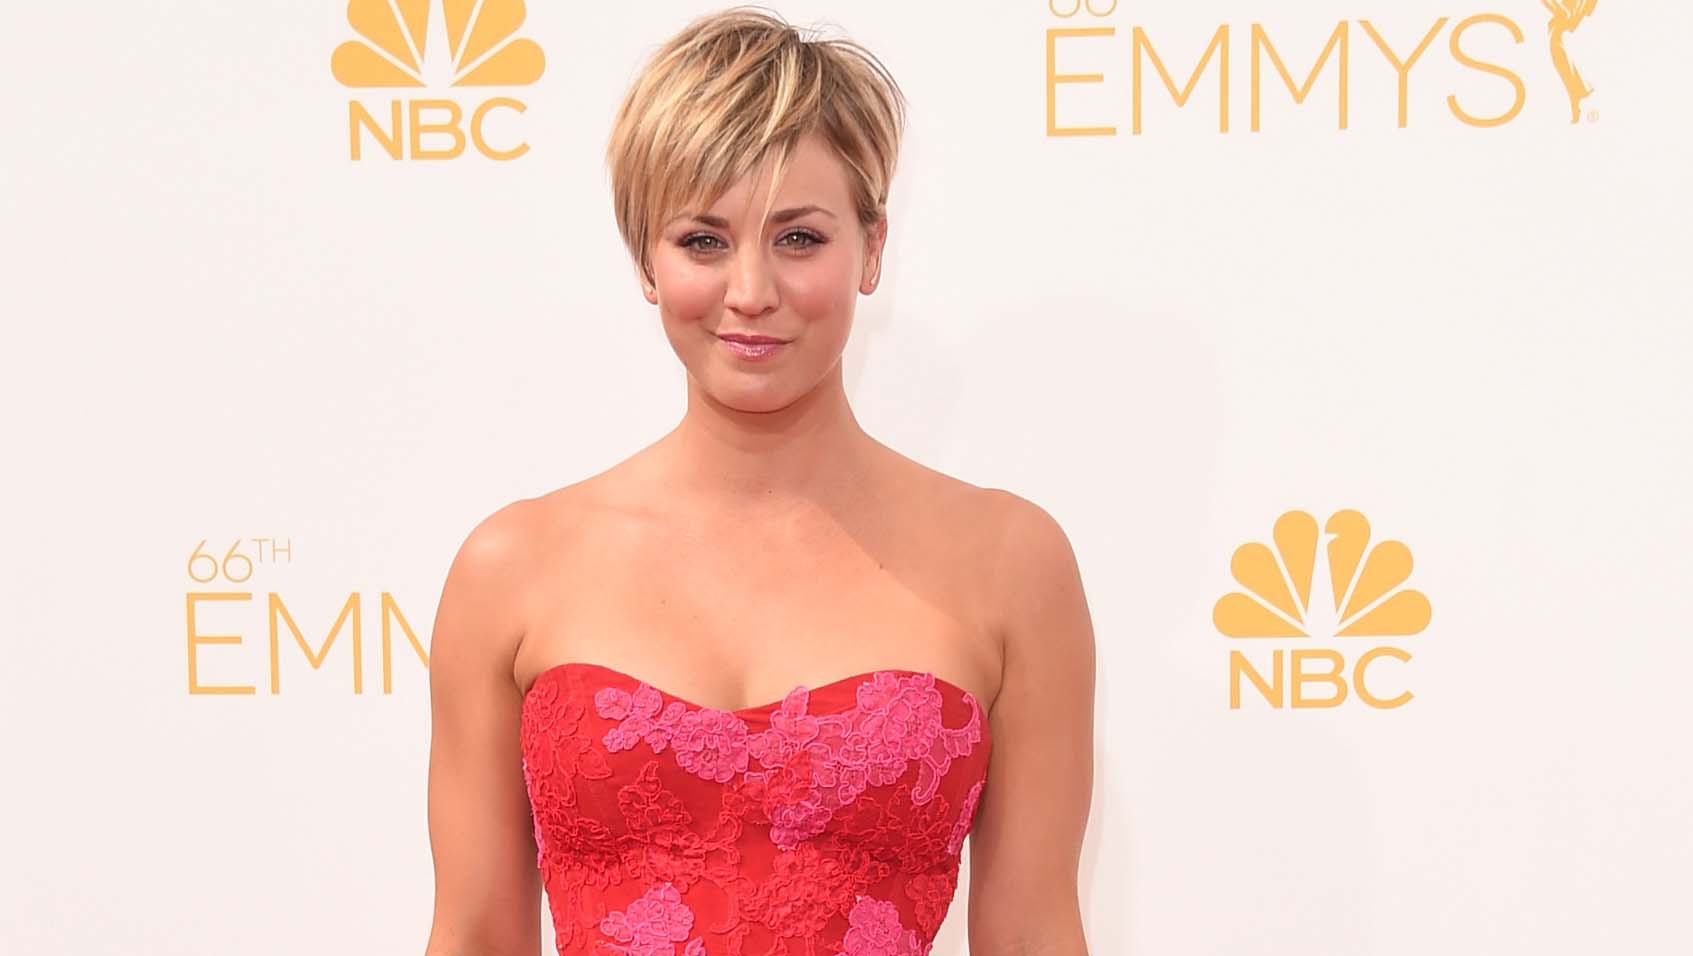 Best of Kaley cuoco phone number